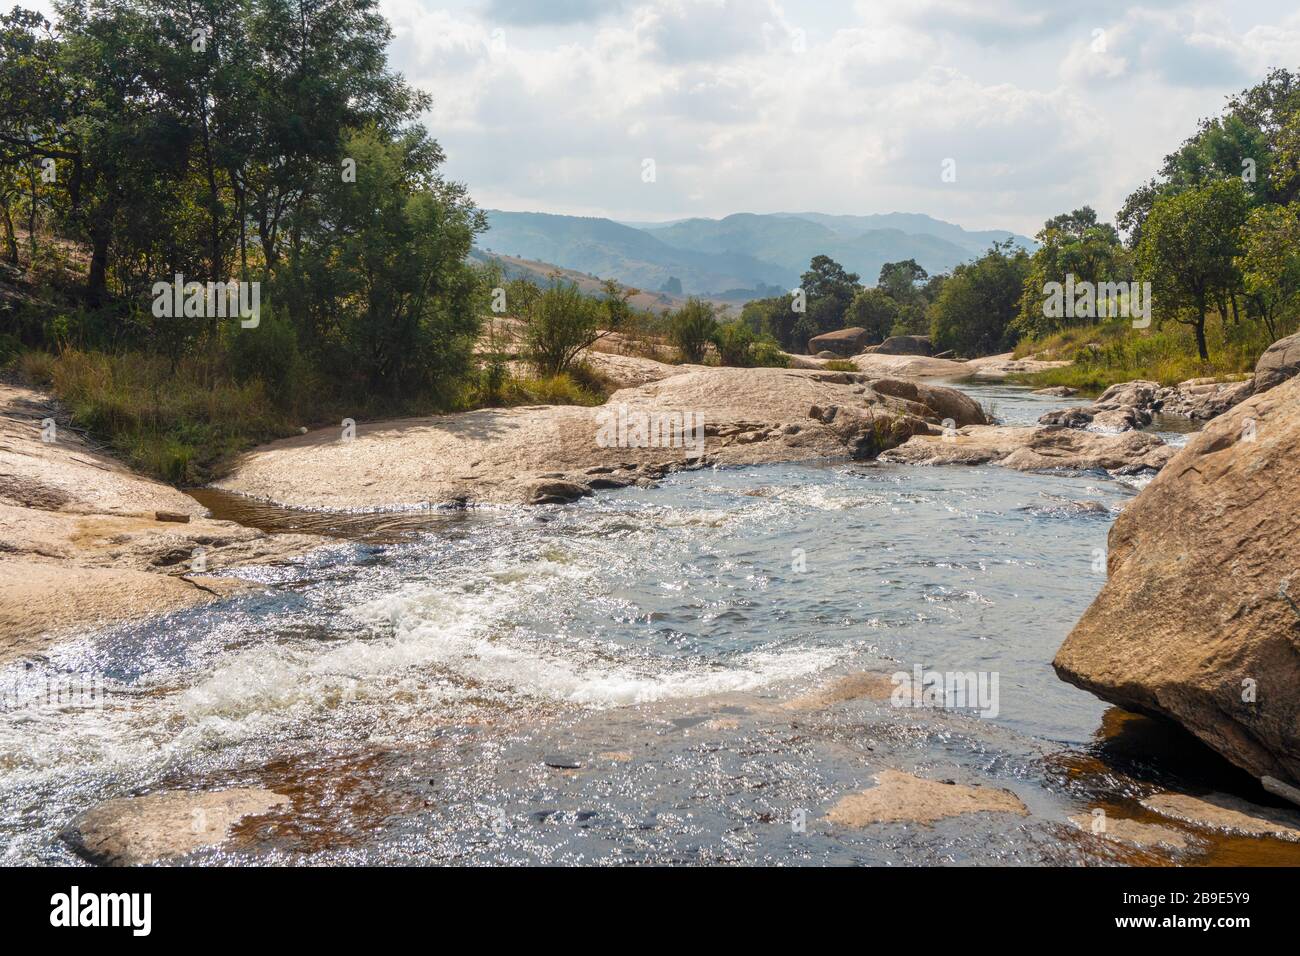 Beautiful landscape with rocky stream in Eswatini, Africa Stock Photo